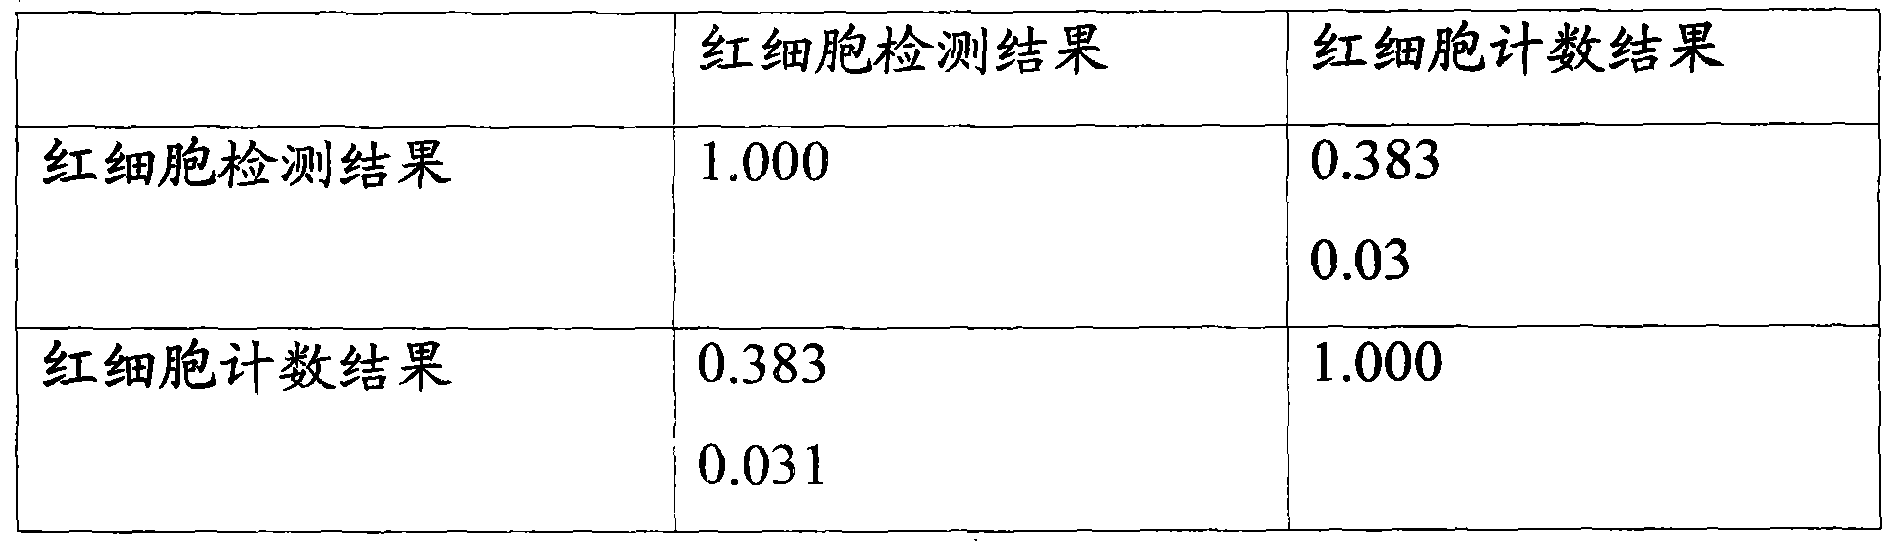 Method for correcting poultry red blood cell counting result detected by full-automatic blood cell analyzer